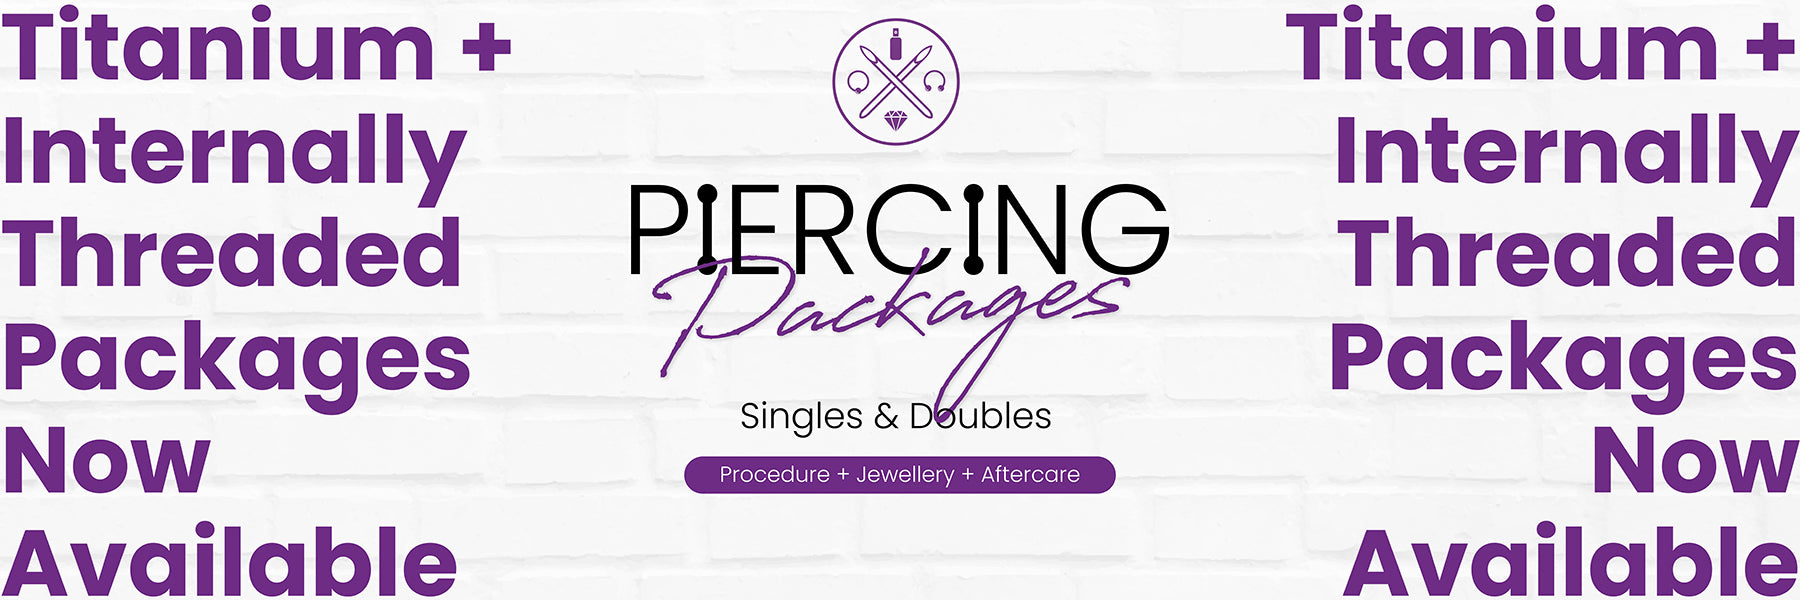 Piercing Packages Banner Image